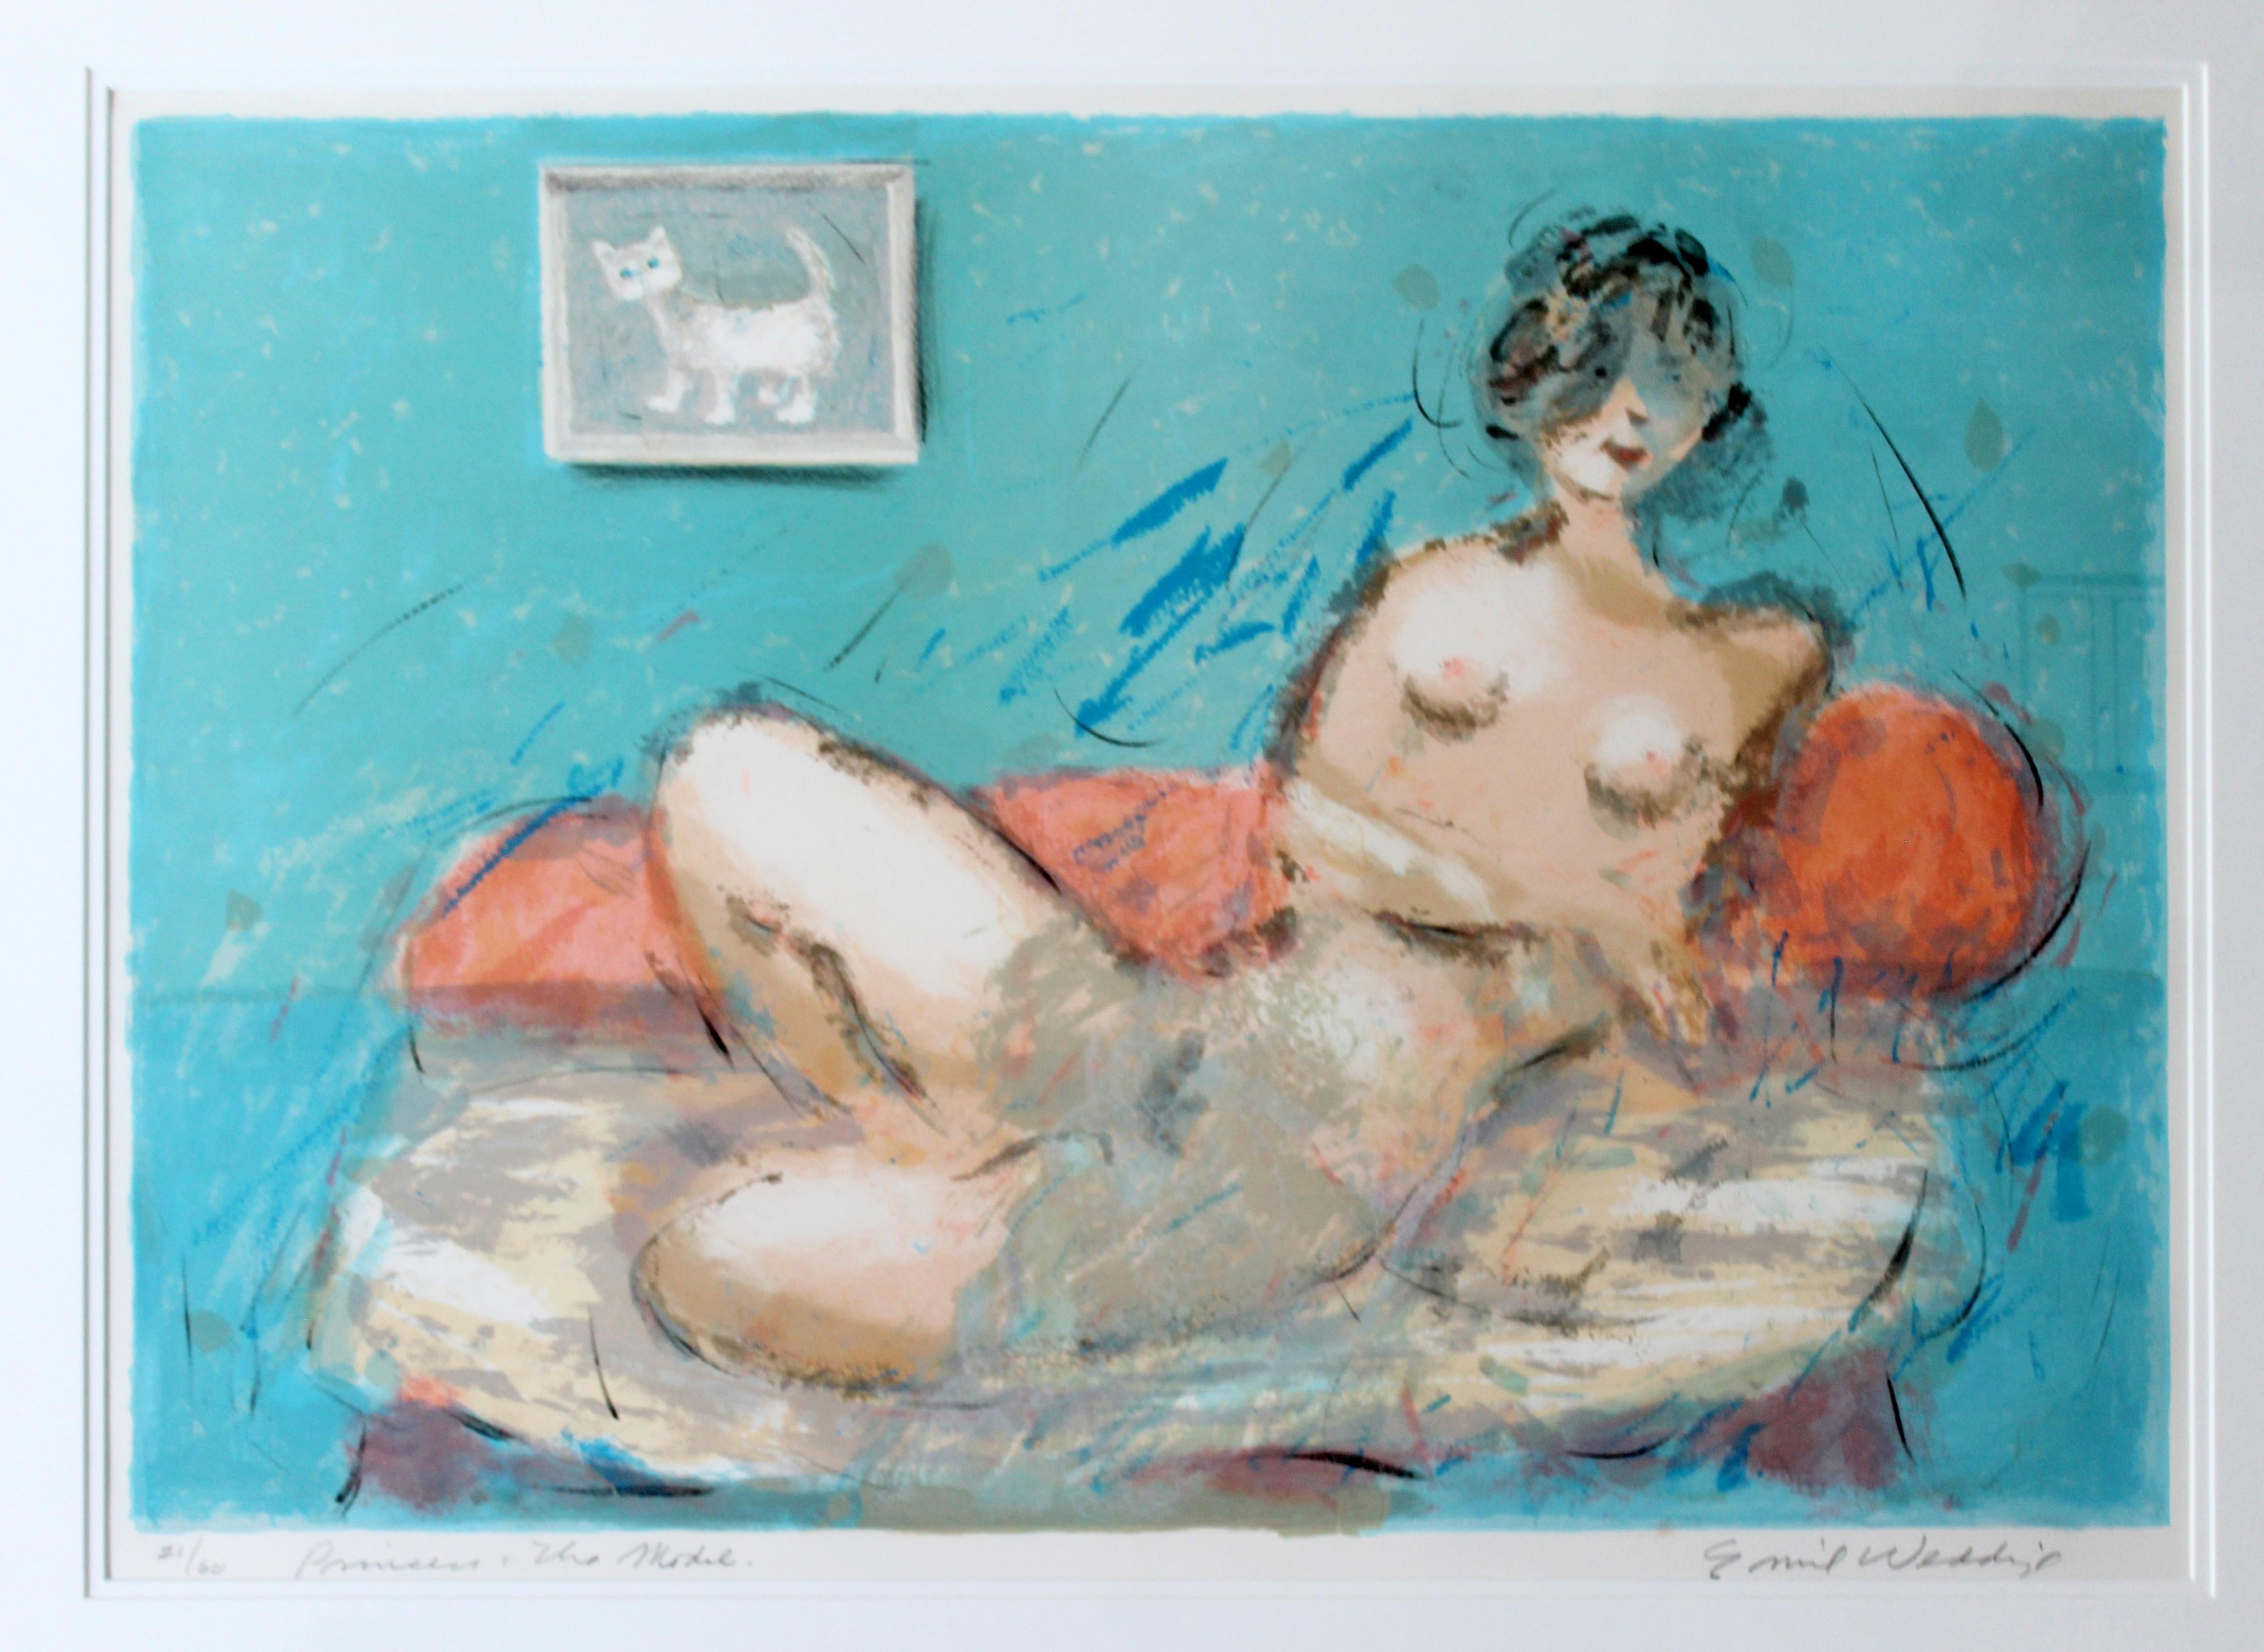 For your consideration is a framed lithograph of a reclining nude, signed by Eddie Weddige, numbered 21/60. In excellent condition. The dimensions of the frame are 36